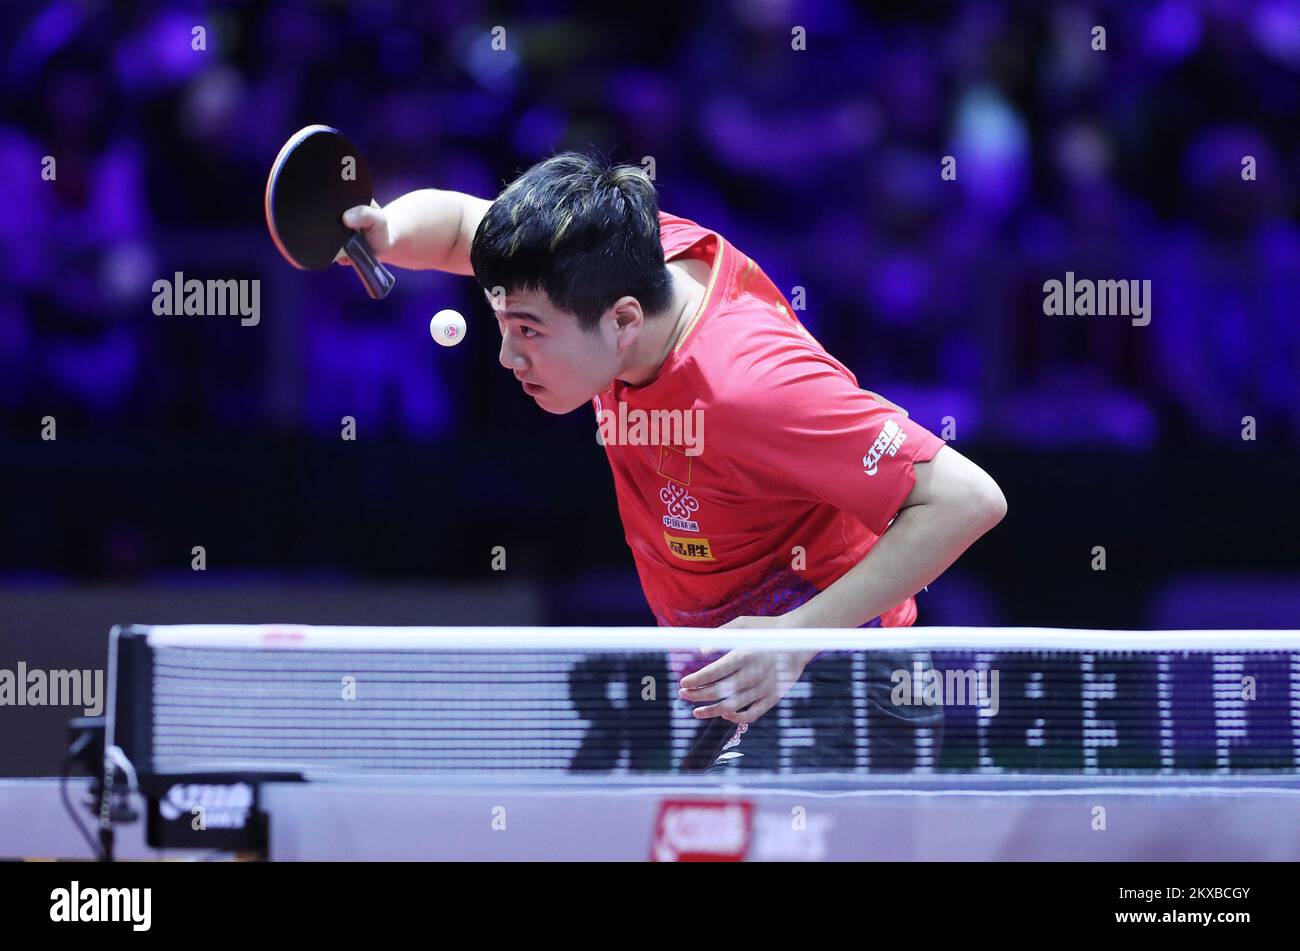 Ittf table tennis world championships hi-res stock photography and images -  Page 2 - Alamy